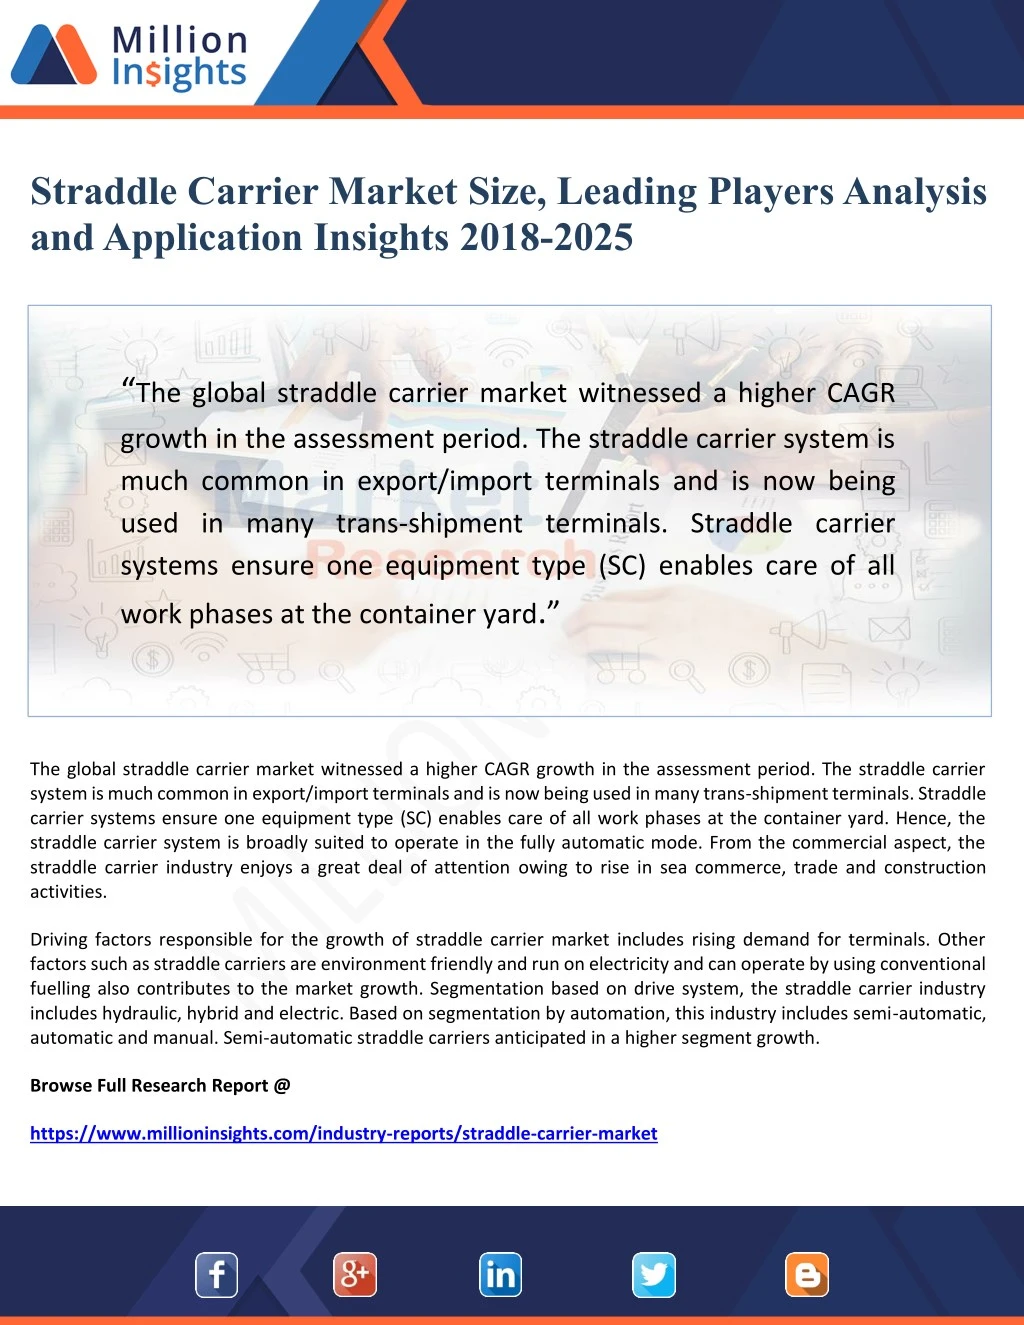 straddle carrier market size leading players